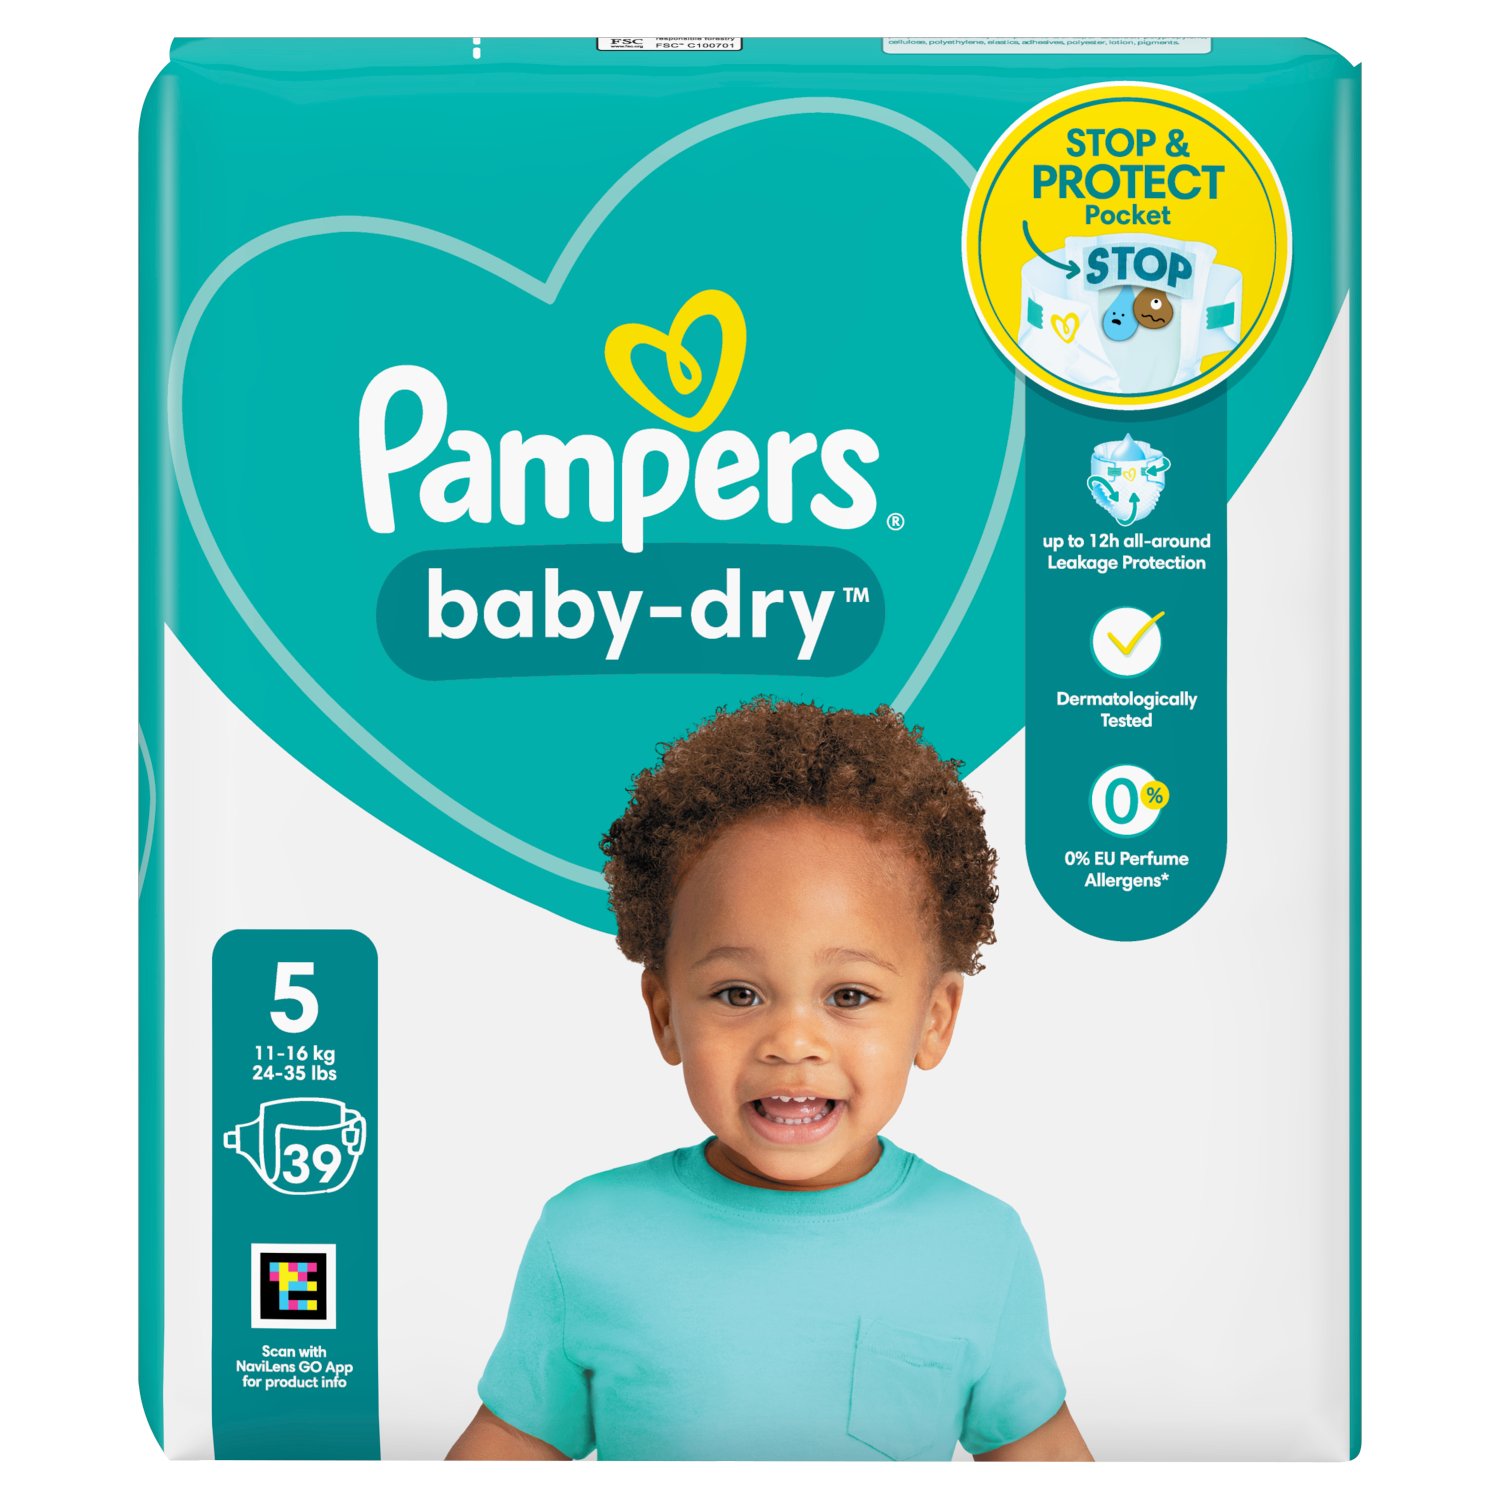 Pampers Baby-Dry Nappies Size 5 (39 Piece)